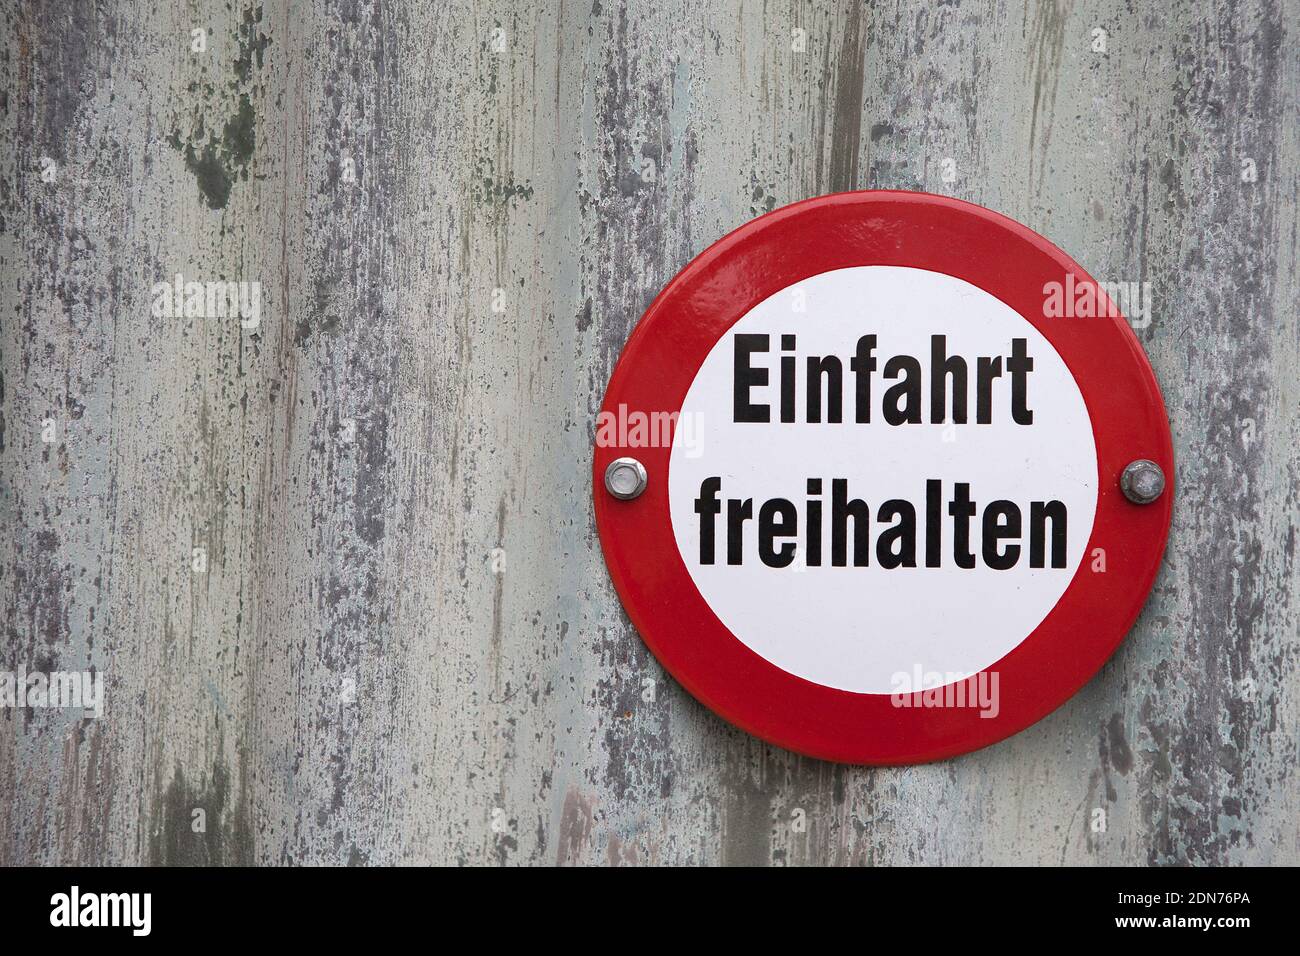 Information sign with the German words 'Einfahrt freihalten' translates into 'Keep gateway clear' in English language Stock Photo